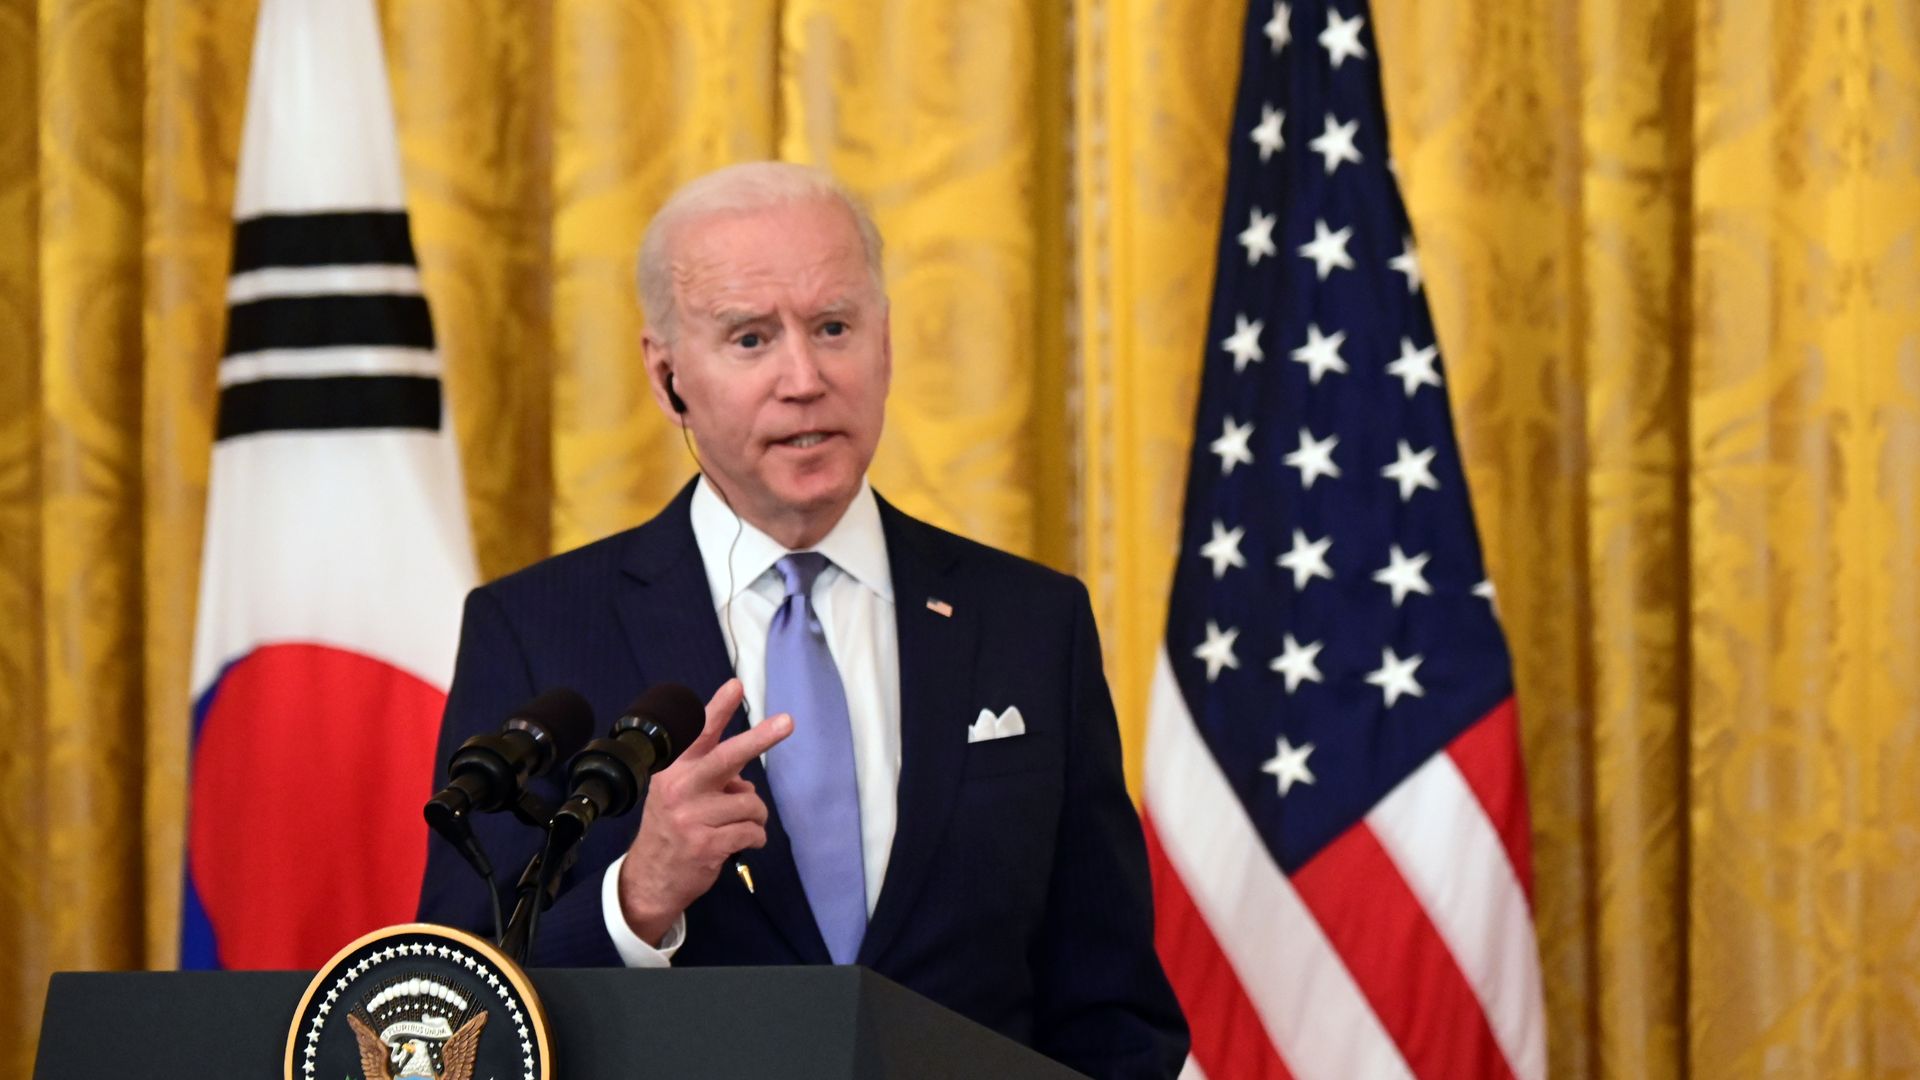 U.S. President Joe Biden speaks during a news conference with Moon Jae-in, South Korea's president, not pictured, in the East Room of the White House in Washington, D.C.